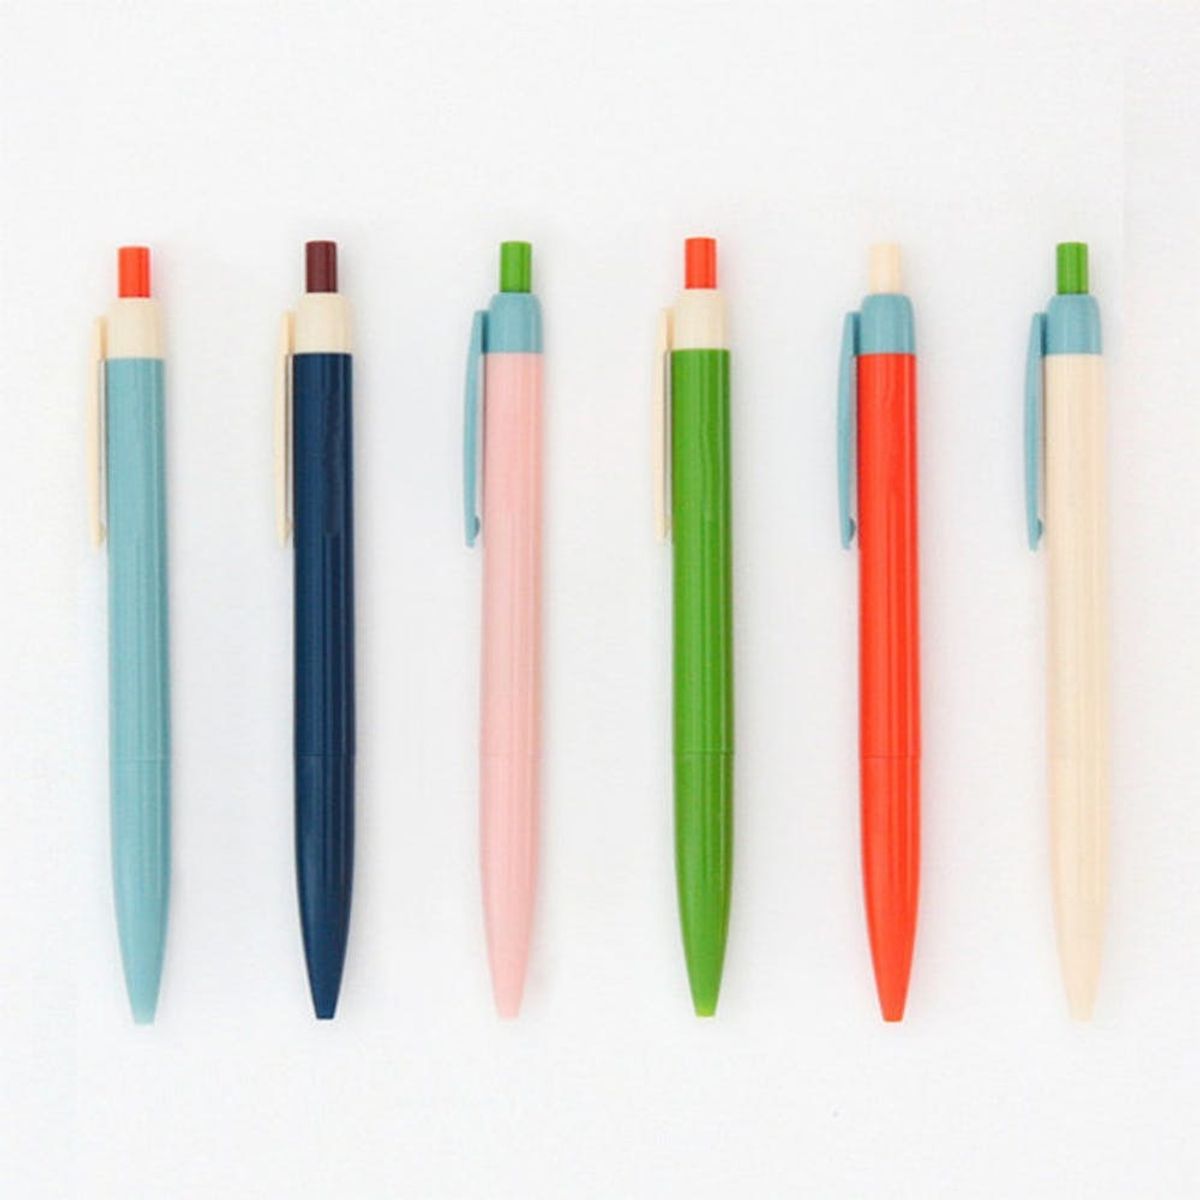 12 Pens and Pencils to Brighten Your Work Day